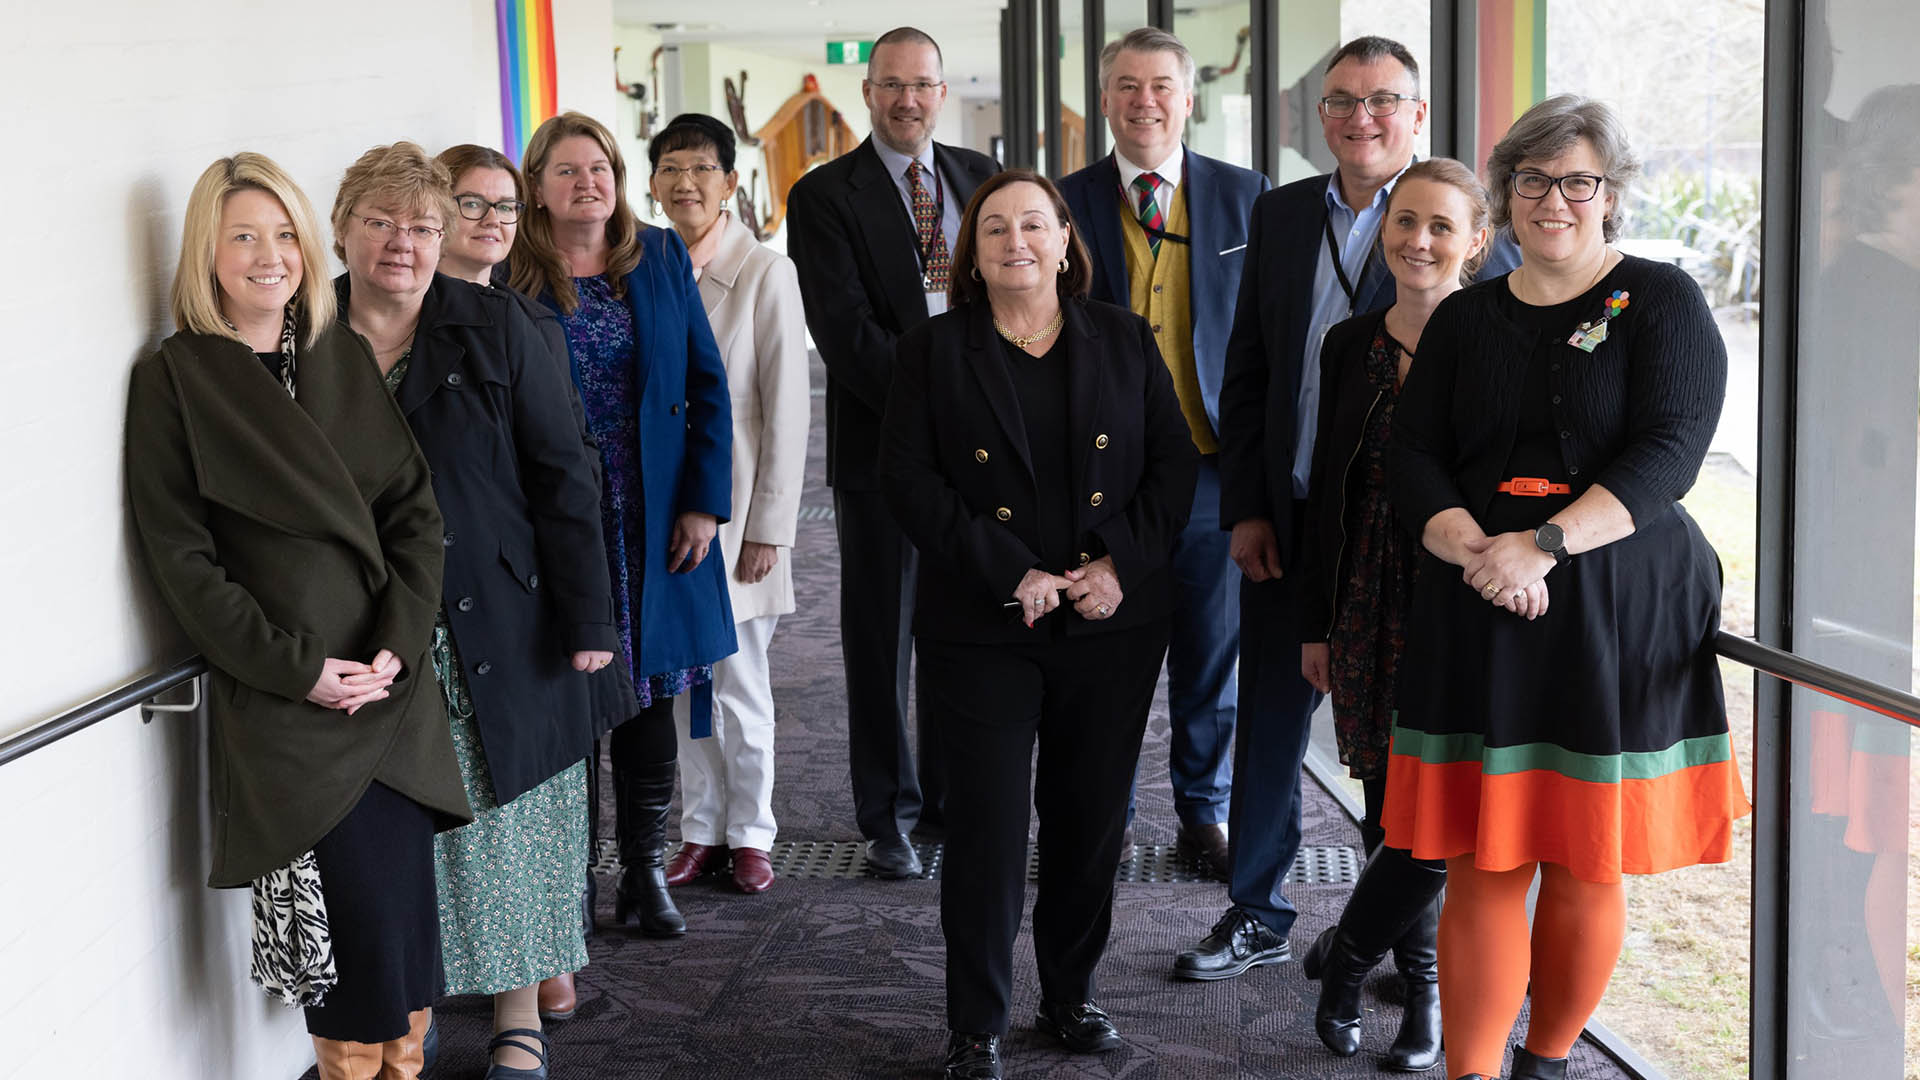 UOW Vice-Chancellor & President Professor Patricia Davidson with senior UOW staff during a visit to UOW's Southern Highlands Campus